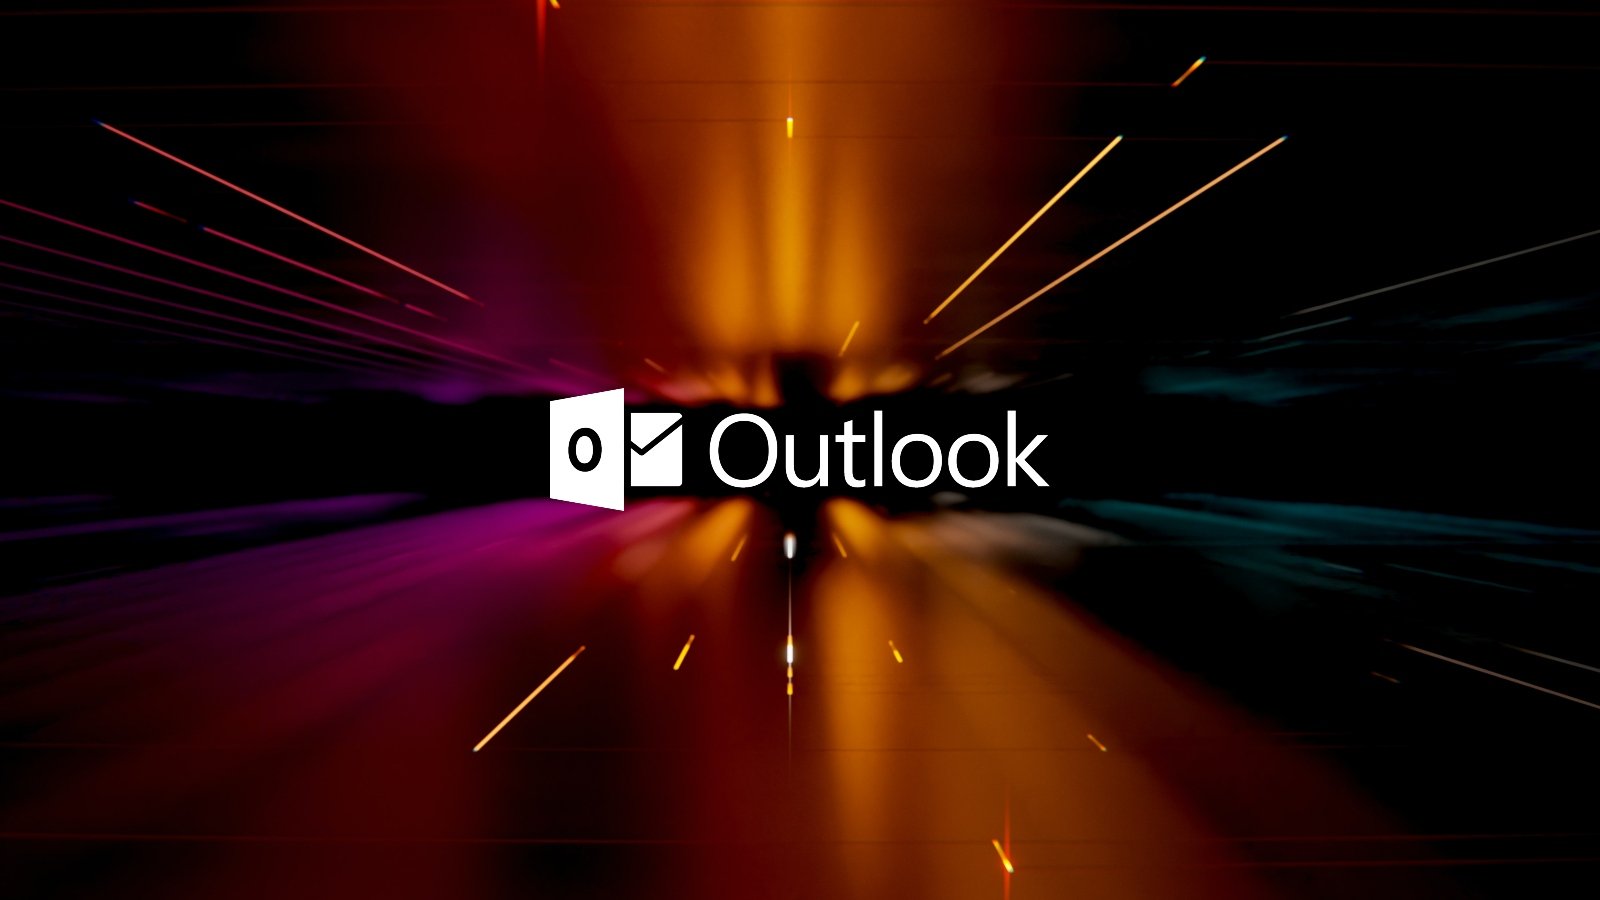 Microsoft patches bypass for recently fixed Outlook zero-click bug